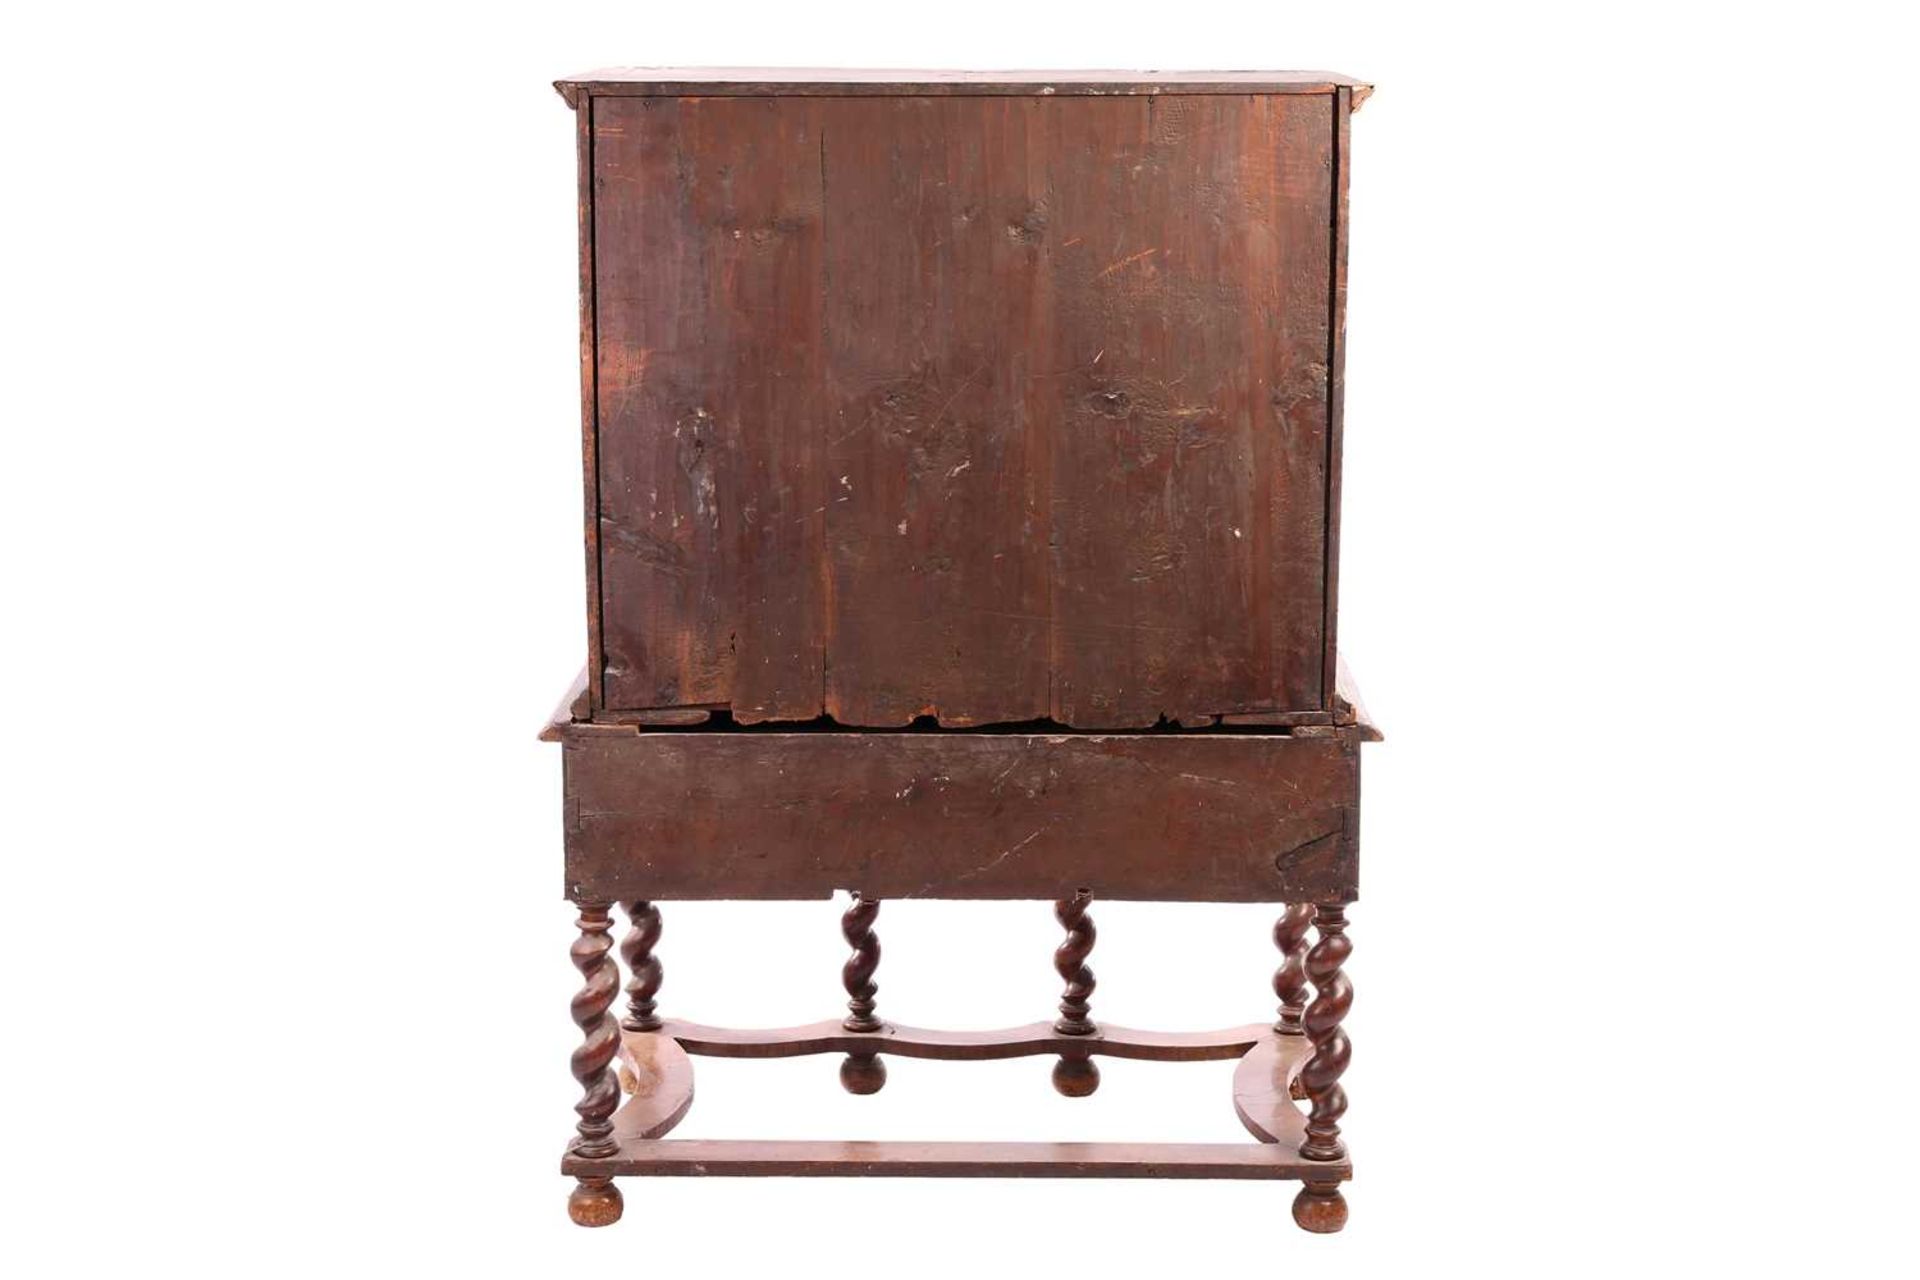 A 17th-century and later figured walnut chest on stand, the upper section with quarter veneered top  - Image 2 of 7